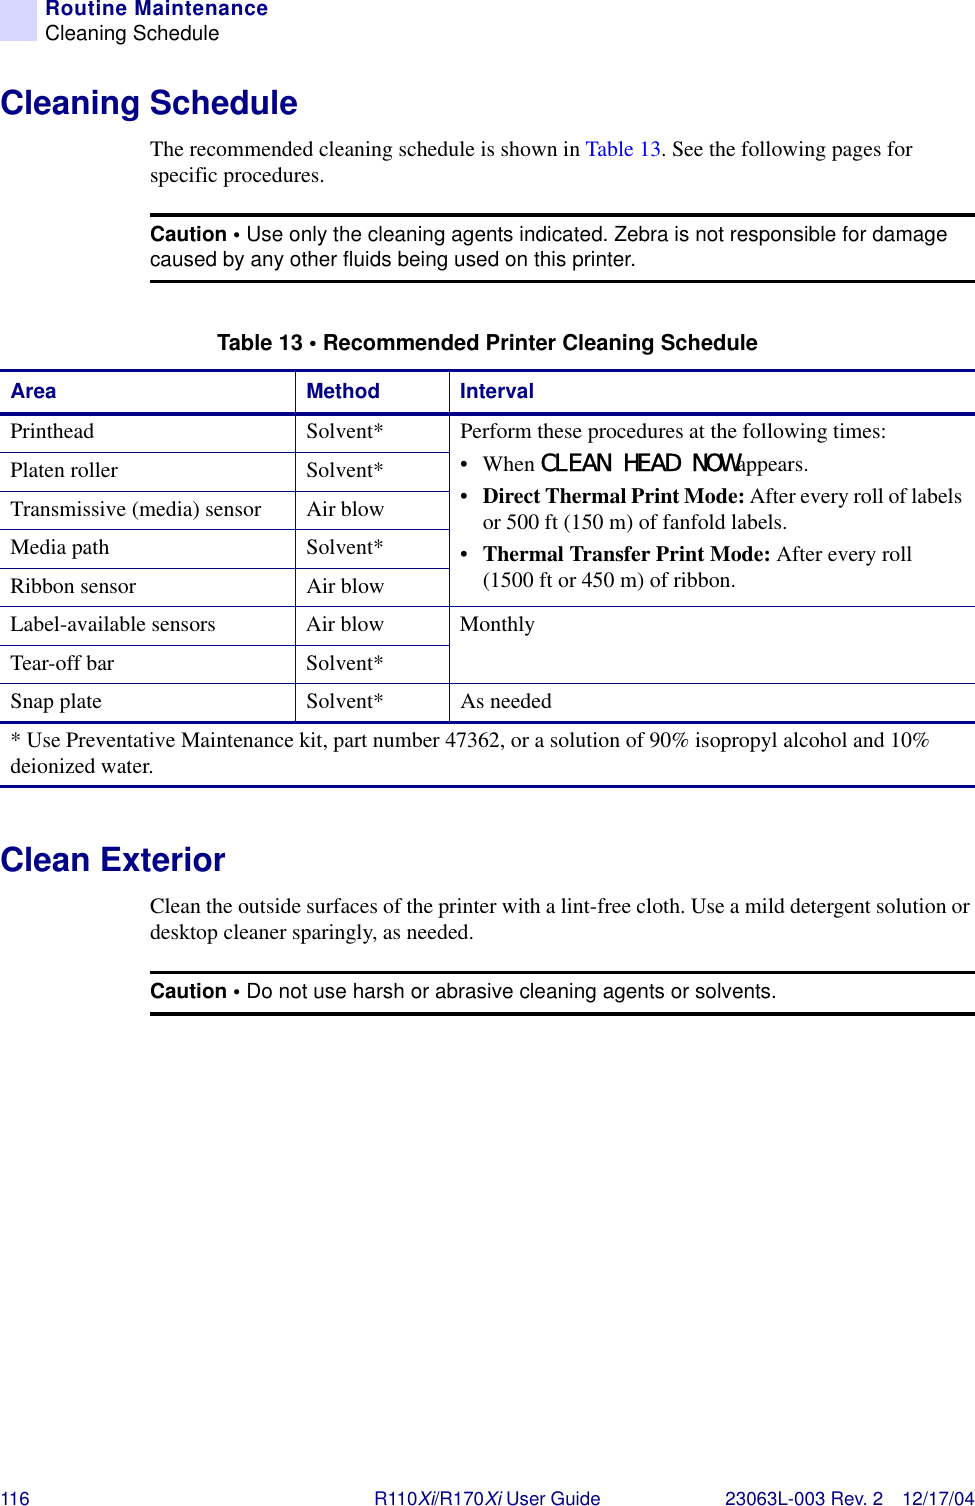 116 R110Xi/R170Xi User Guide 23063L-003 Rev. 2 12/17/04Routine MaintenanceCleaning ScheduleCleaning ScheduleThe recommended cleaning schedule is shown in Table 13. See the following pages for specific procedures.Clean ExteriorClean the outside surfaces of the printer with a lint-free cloth. Use a mild detergent solution or desktop cleaner sparingly, as needed.Caution • Use only the cleaning agents indicated. Zebra is not responsible for damage caused by any other fluids being used on this printer.Table 13 • Recommended Printer Cleaning ScheduleArea Method IntervalPrinthead Solvent* Perform these procedures at the following times:•When CLEAN HEAD NOWappears.•Direct Thermal Print Mode: After every roll of labels or 500 ft (150 m) of fanfold labels.•Thermal Transfer Print Mode: After every roll (1500 ft or 450 m) of ribbon.Platen roller Solvent*Transmissive (media) sensor Air blowMedia path Solvent*Ribbon sensor Air blowLabel-available sensors Air blow MonthlyTear-off bar Solvent*Snap plate Solvent* As needed* Use Preventative Maintenance kit, part number 47362, or a solution of 90% isopropyl alcohol and 10% deionized water. Caution • Do not use harsh or abrasive cleaning agents or solvents.